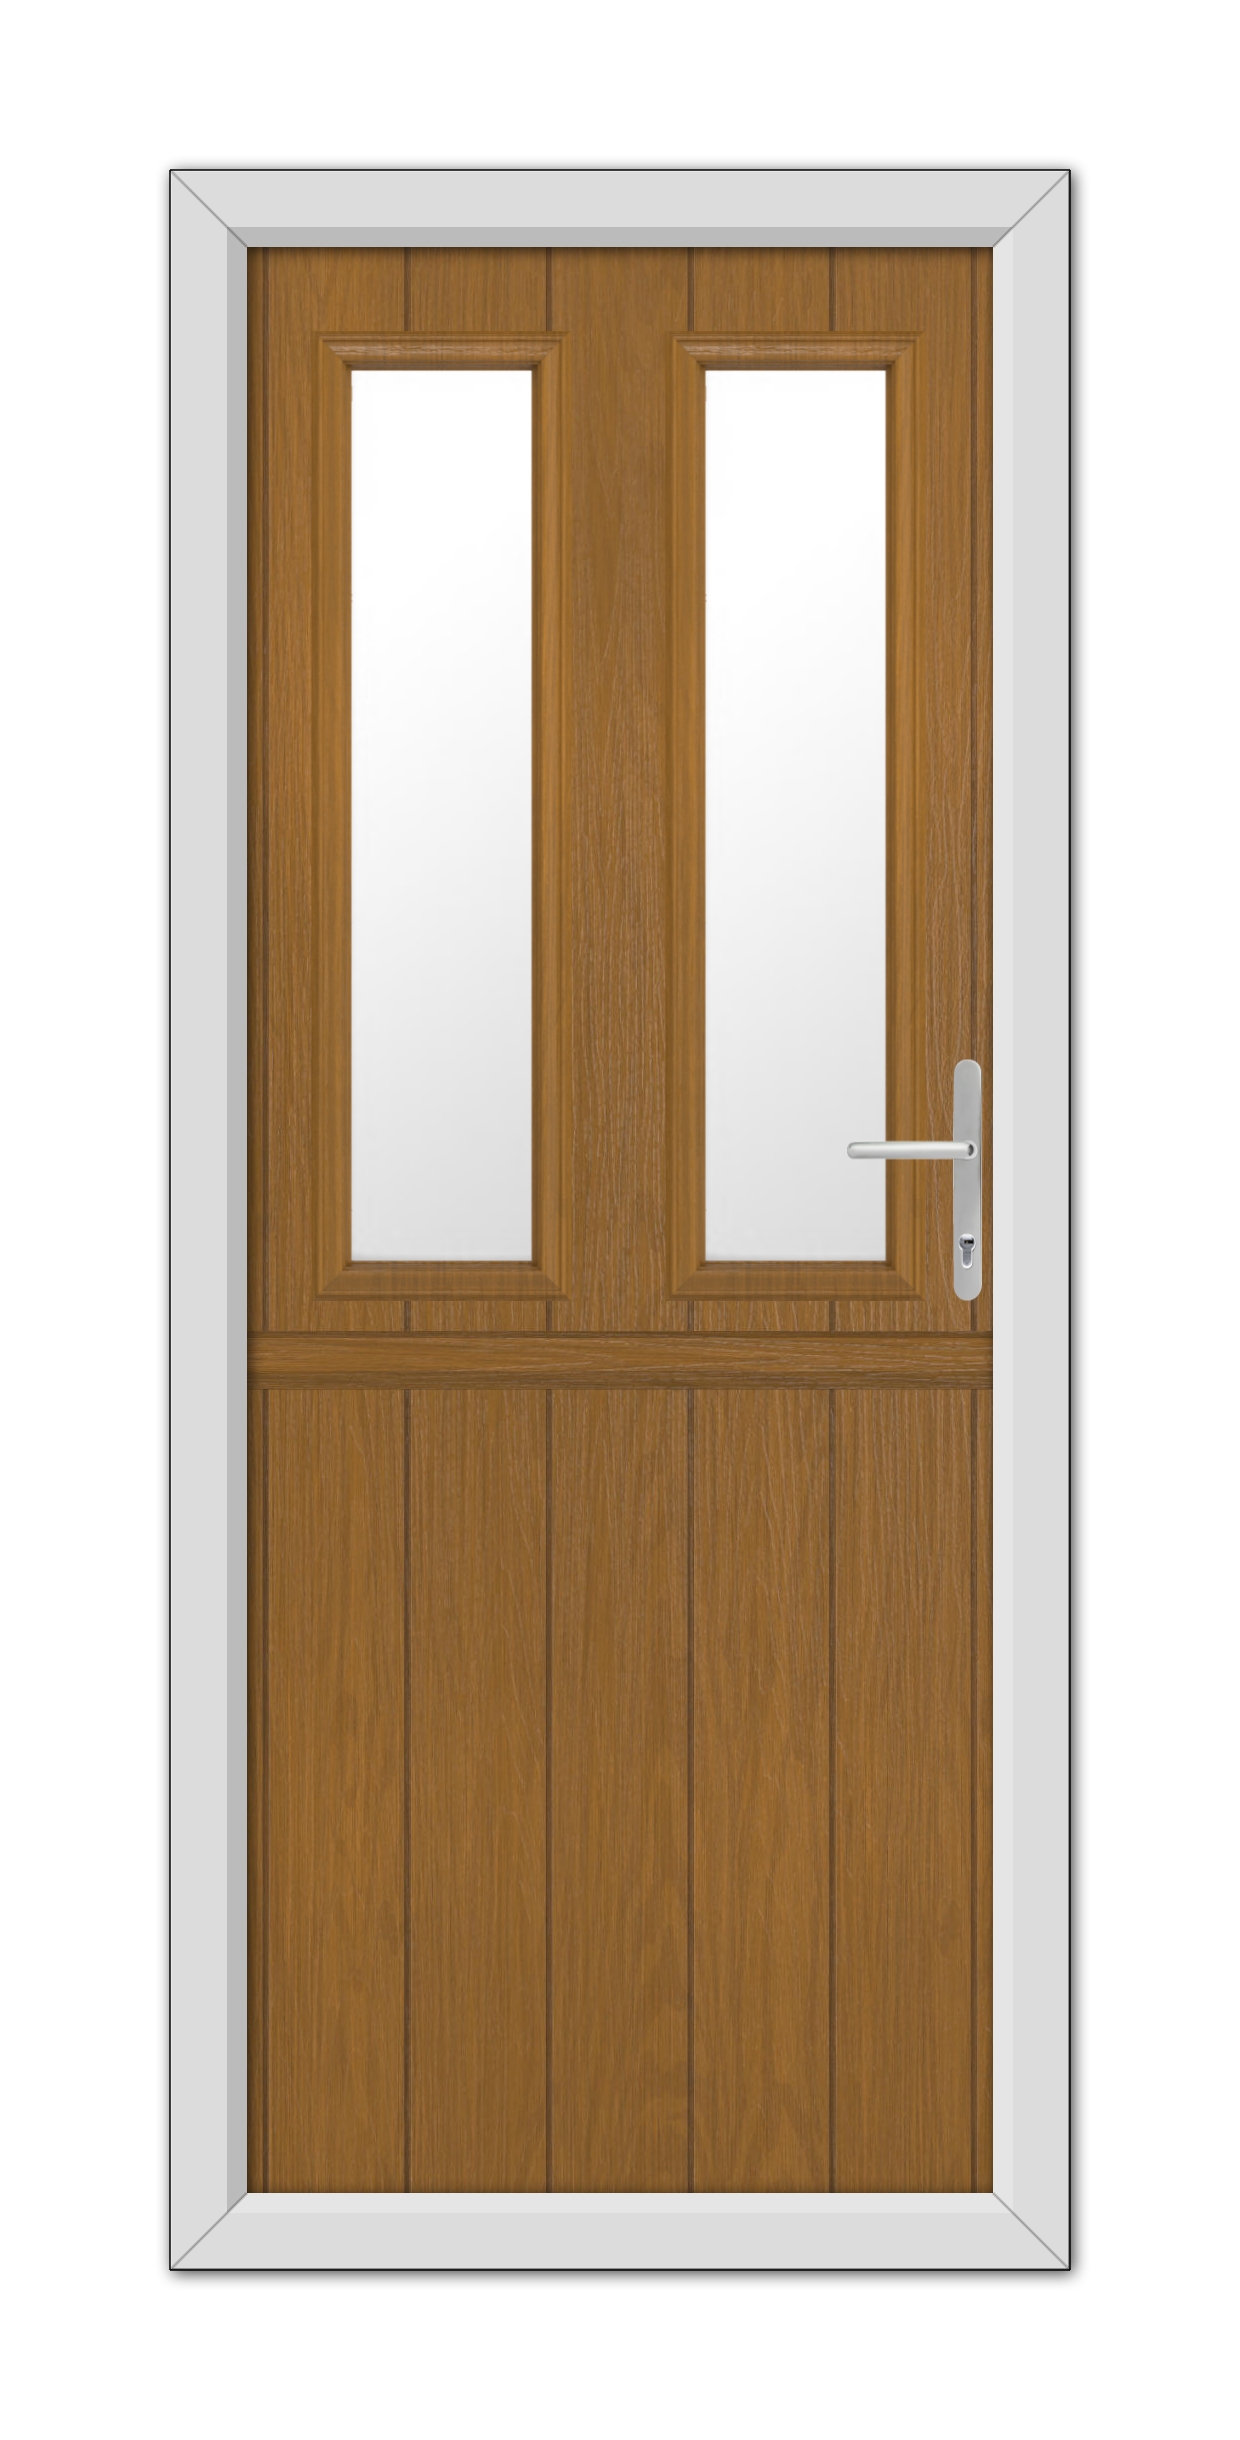 Oak Wellington Stable Composite Door 48mm Timber Core with glass panels and a metal handle, framed by a white casing, isolated on a white background.